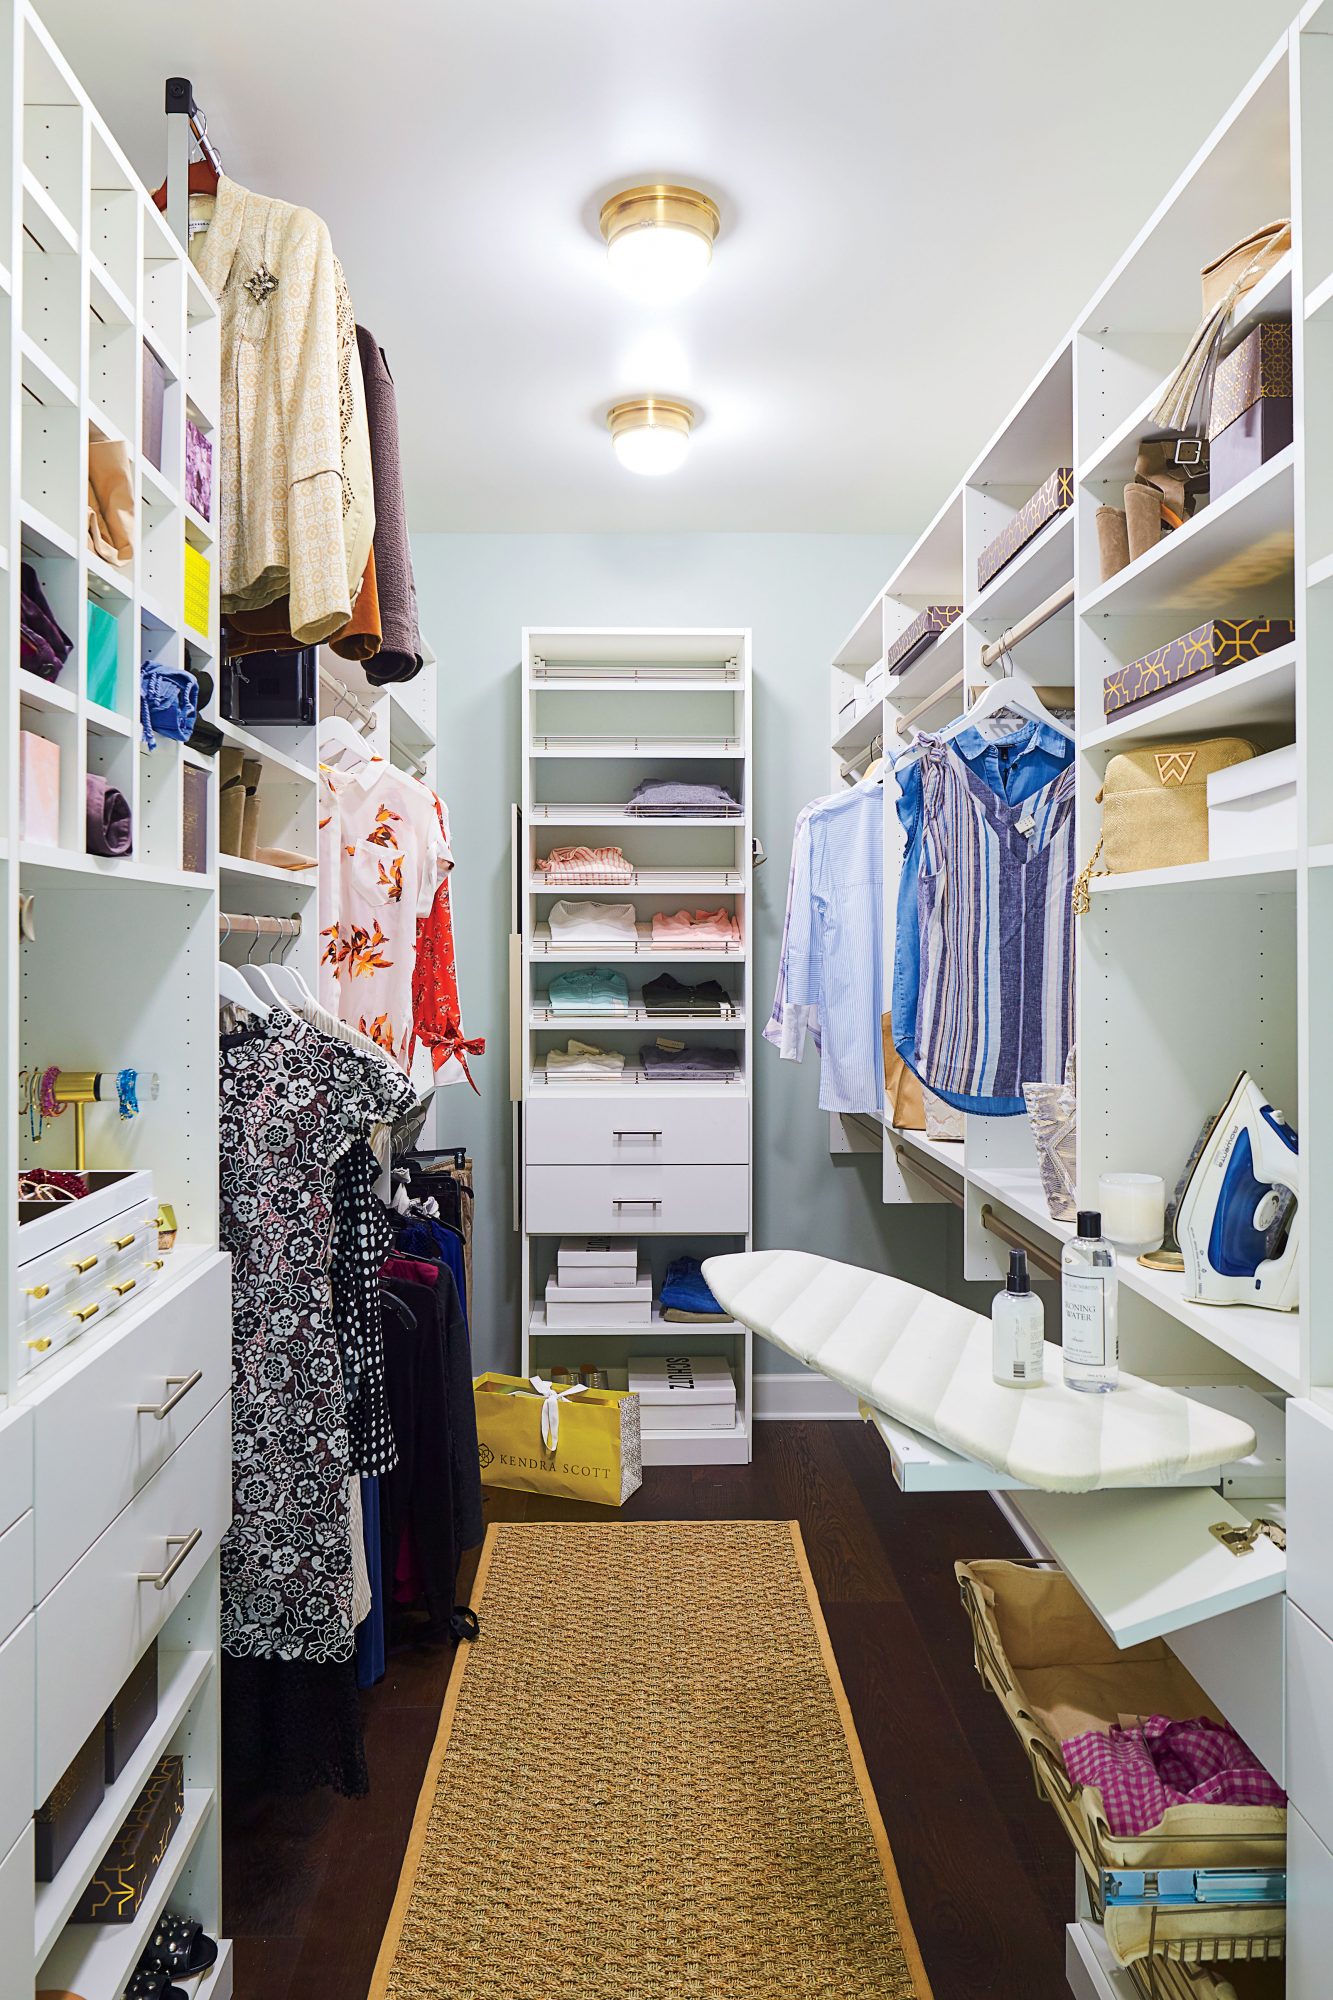 More Space Place can show you the advantages of a custom designed closet or storage solution. Our custom closet home systems are fully adjustable and include accessories and lighting to enhance the look and function of your space. Contact a More Space Place designer to transform your closet today.